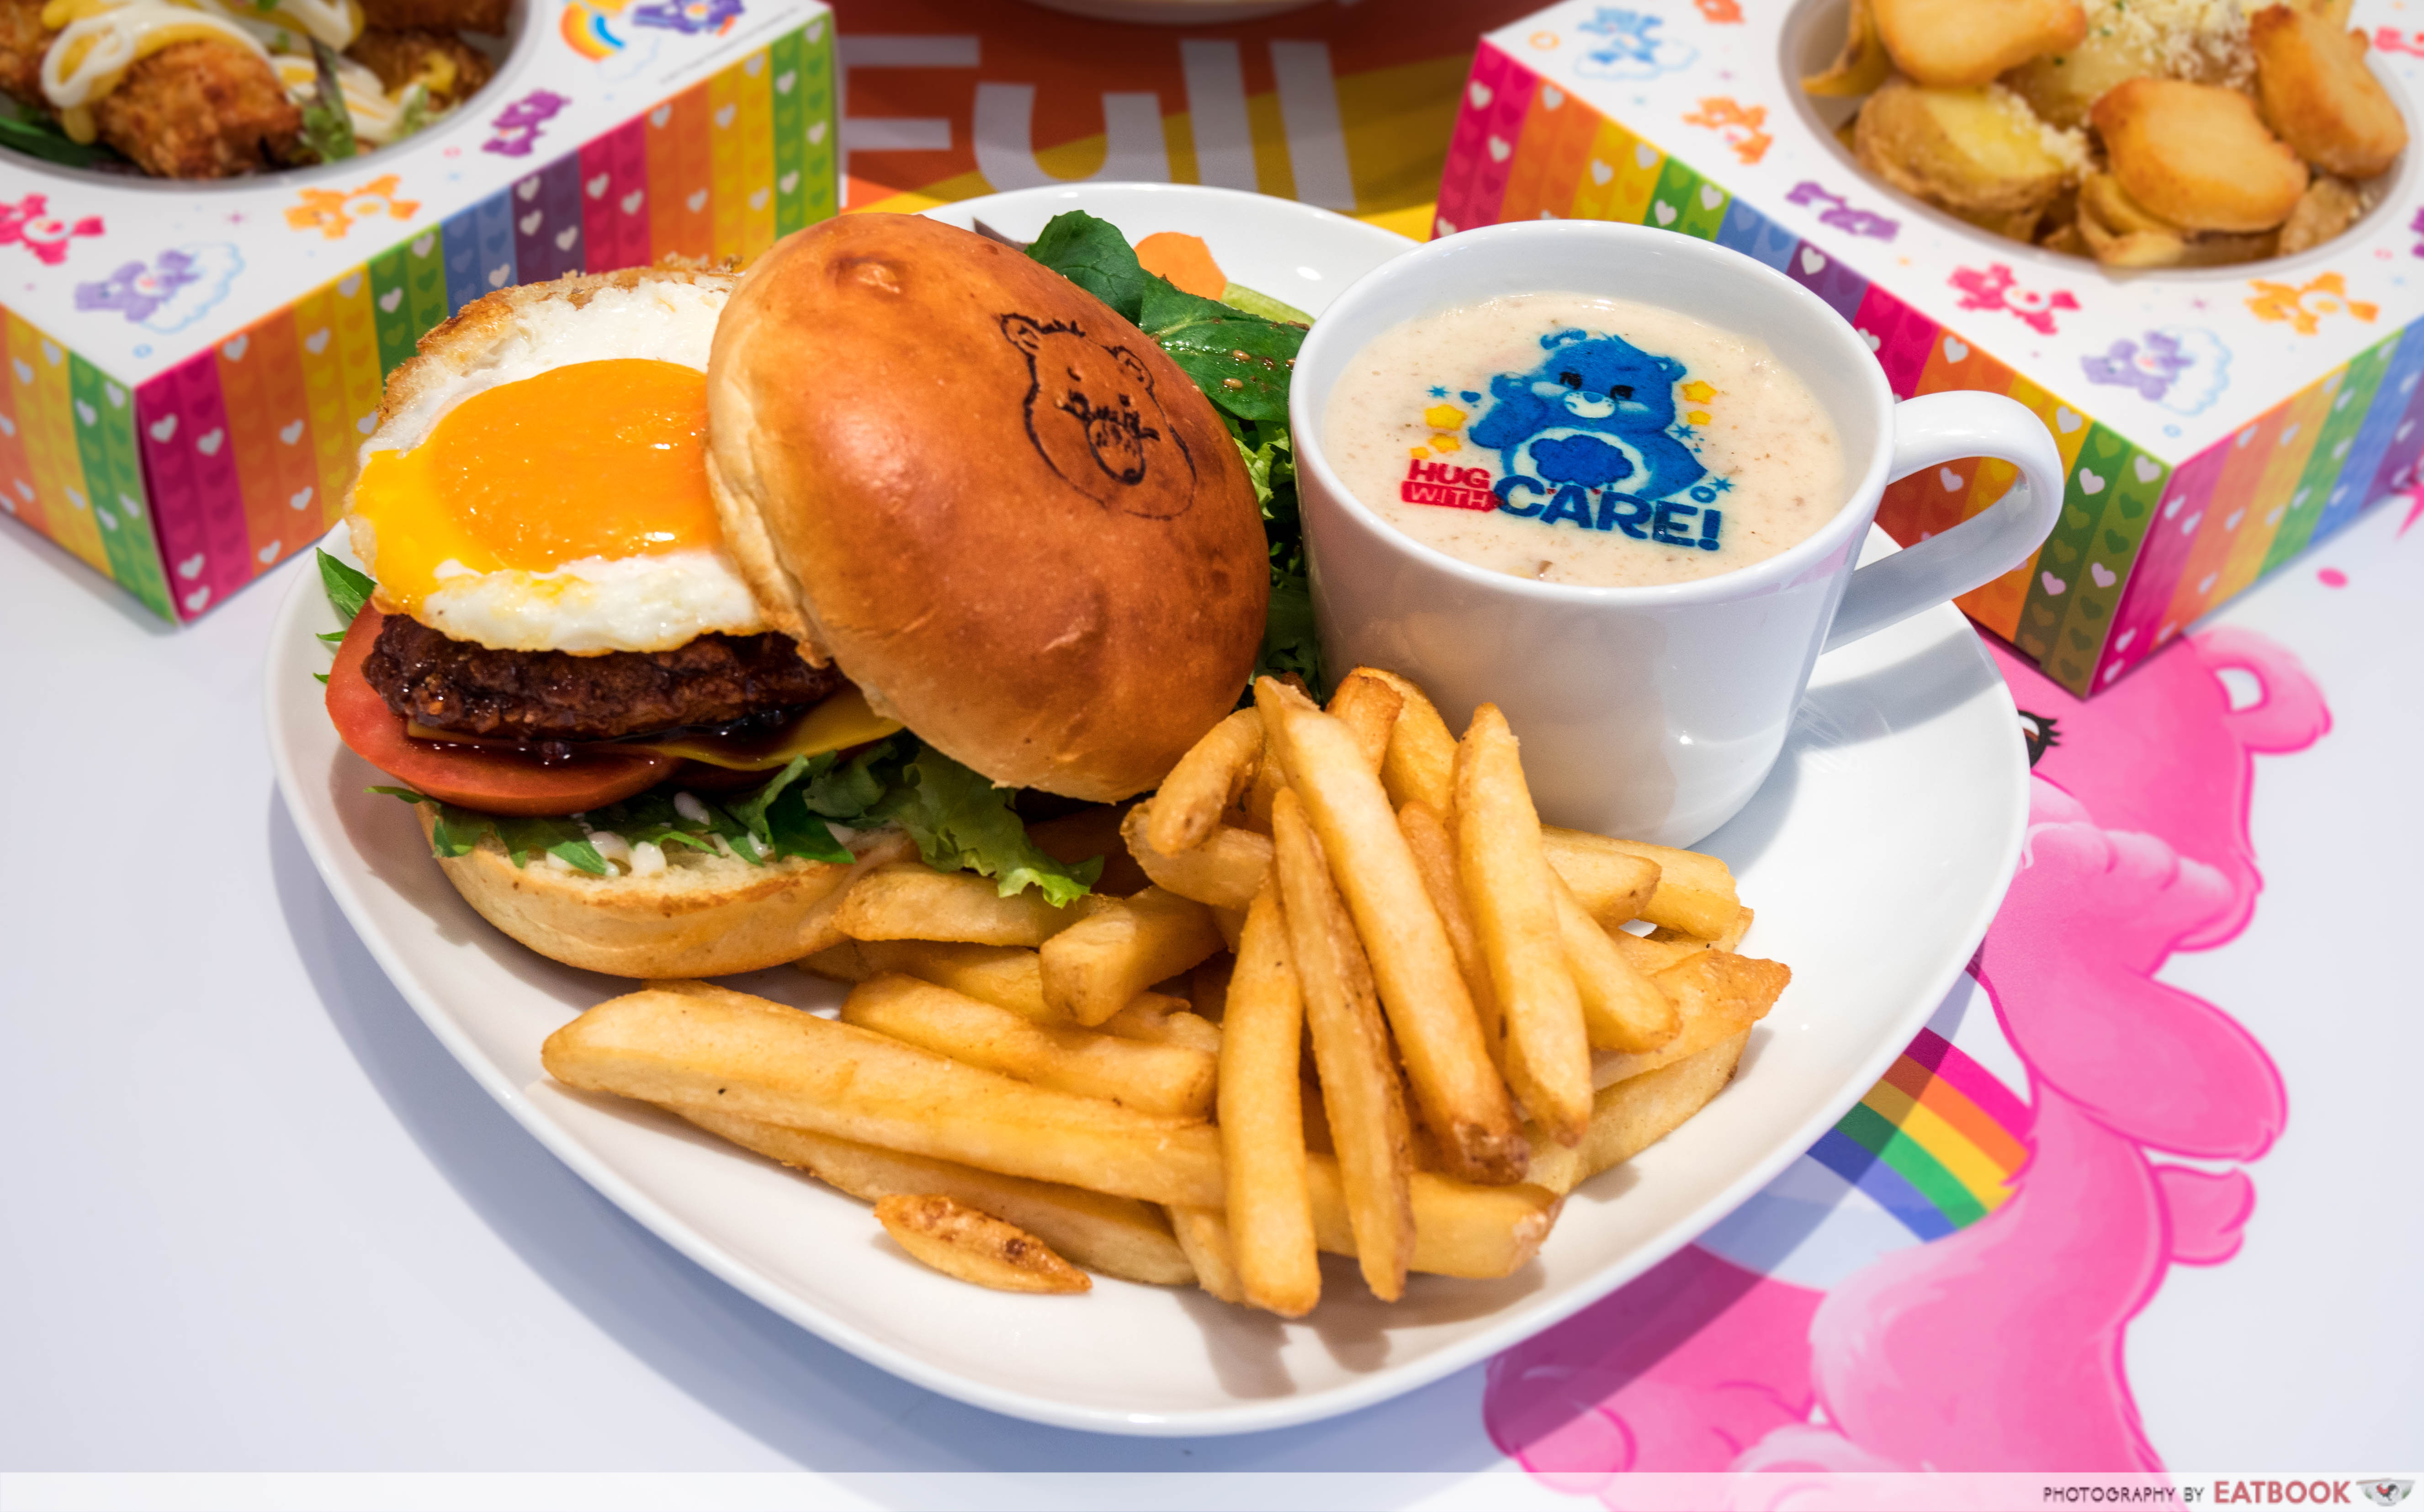 Care Bears Cafe - chicken burger